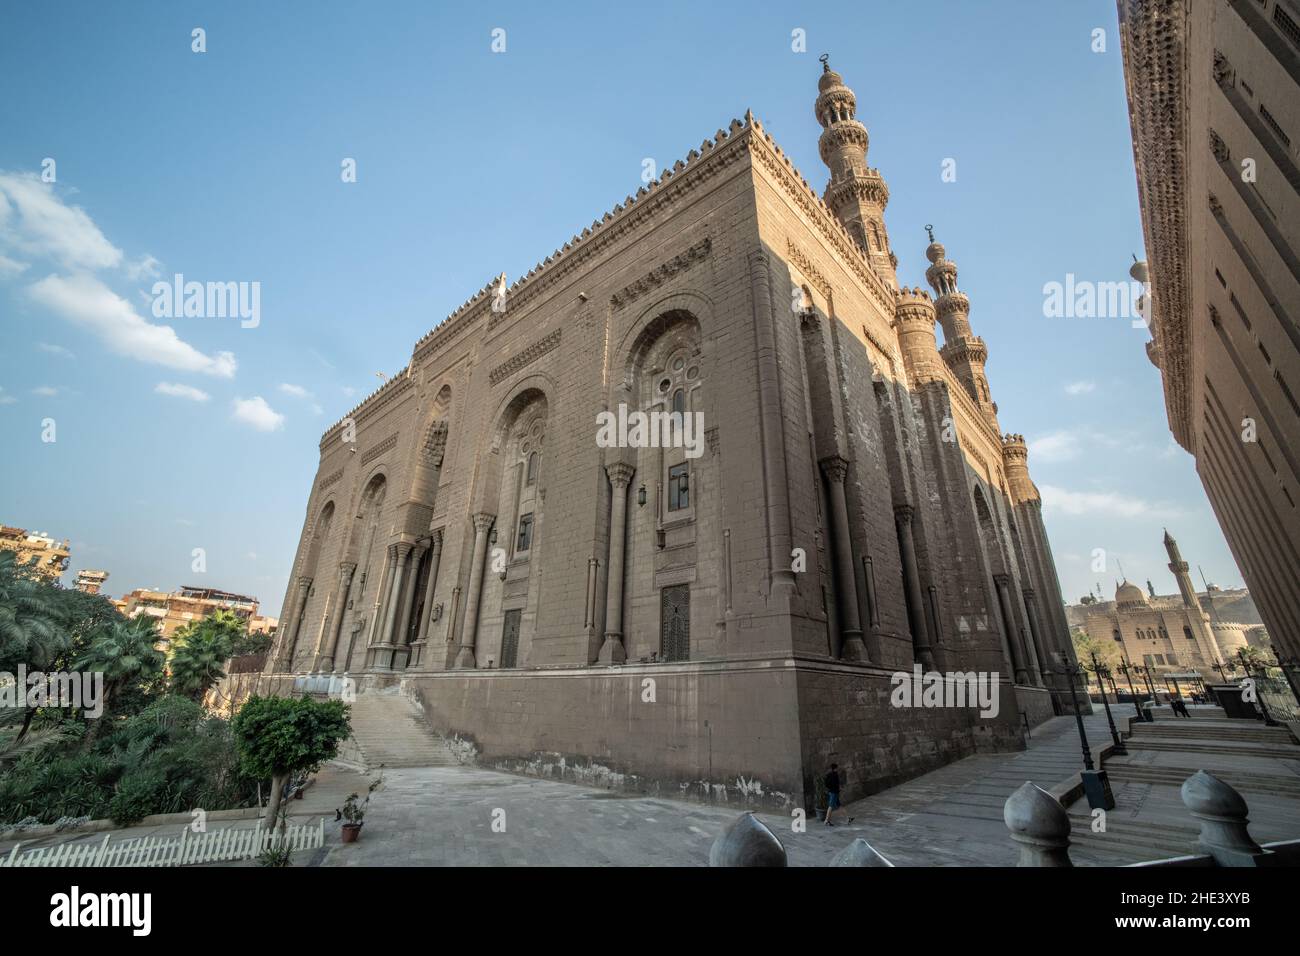 The exterior of the Al Rifai mosque an islamic monument in the historic district of Cairo, Egypt. Stock Photo